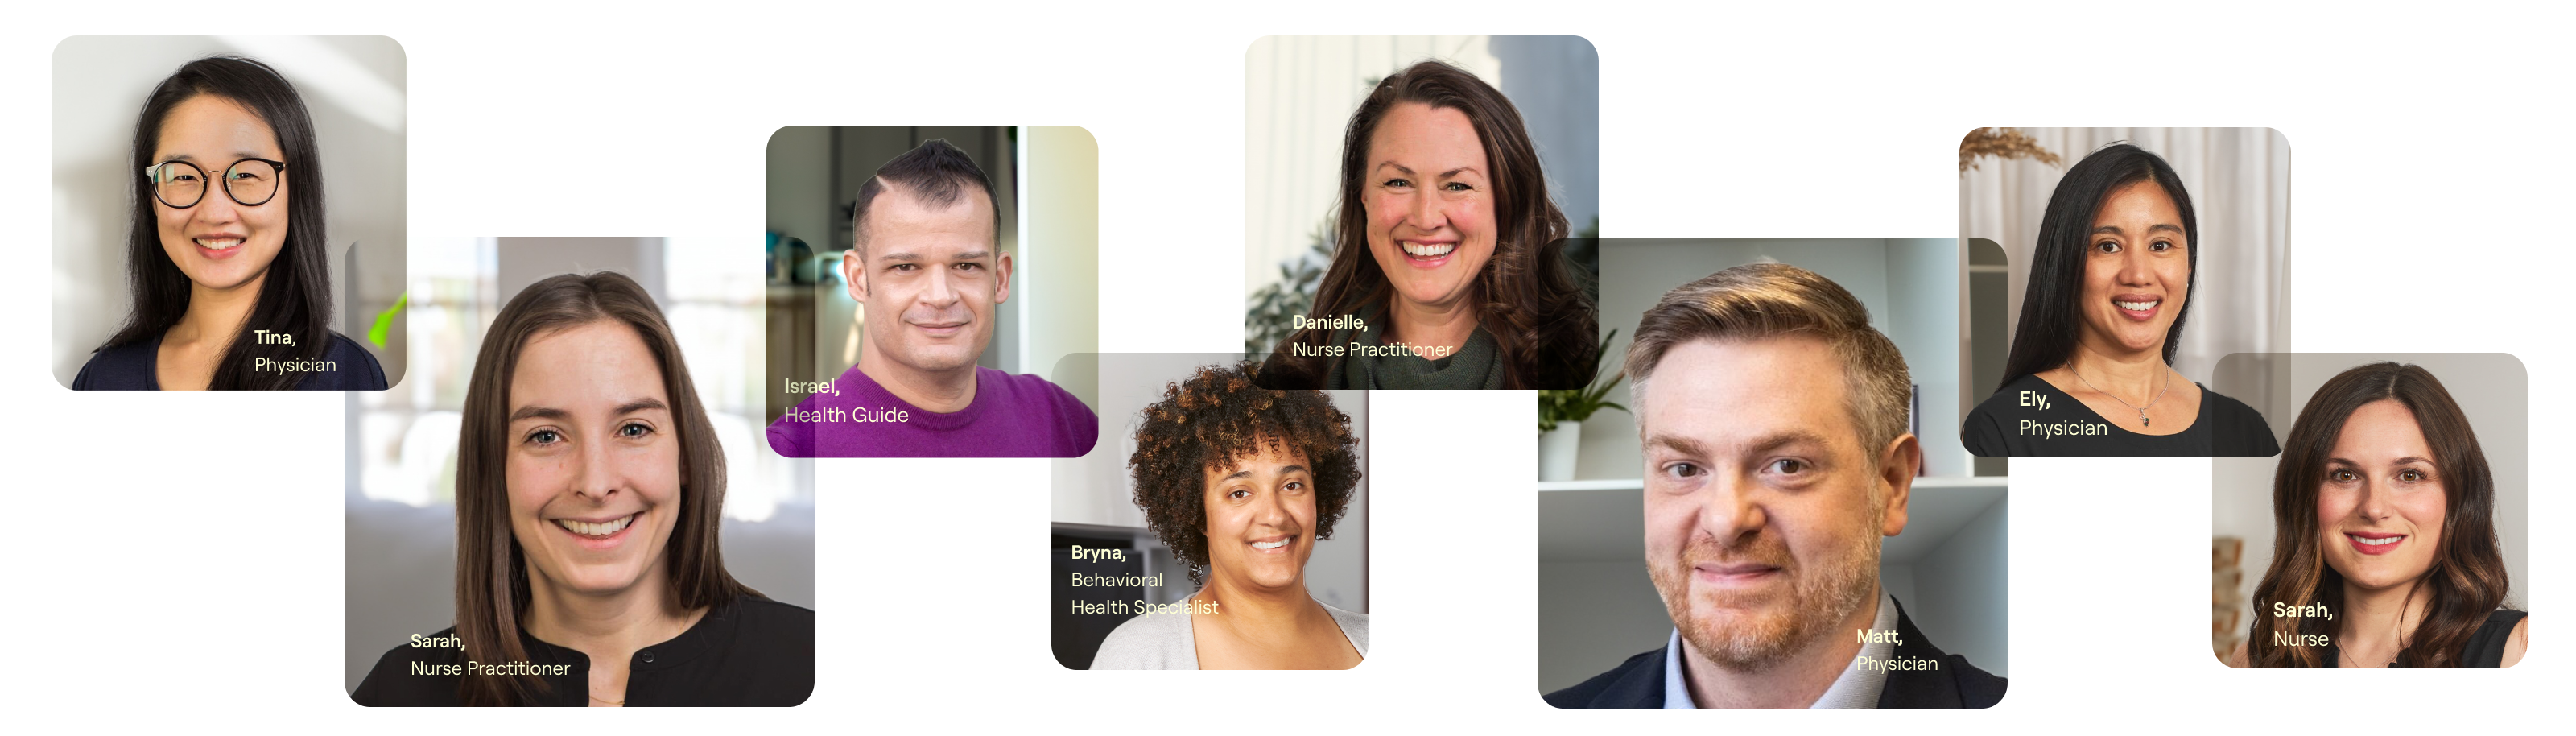 8 overlapping care team member headshots + titles 